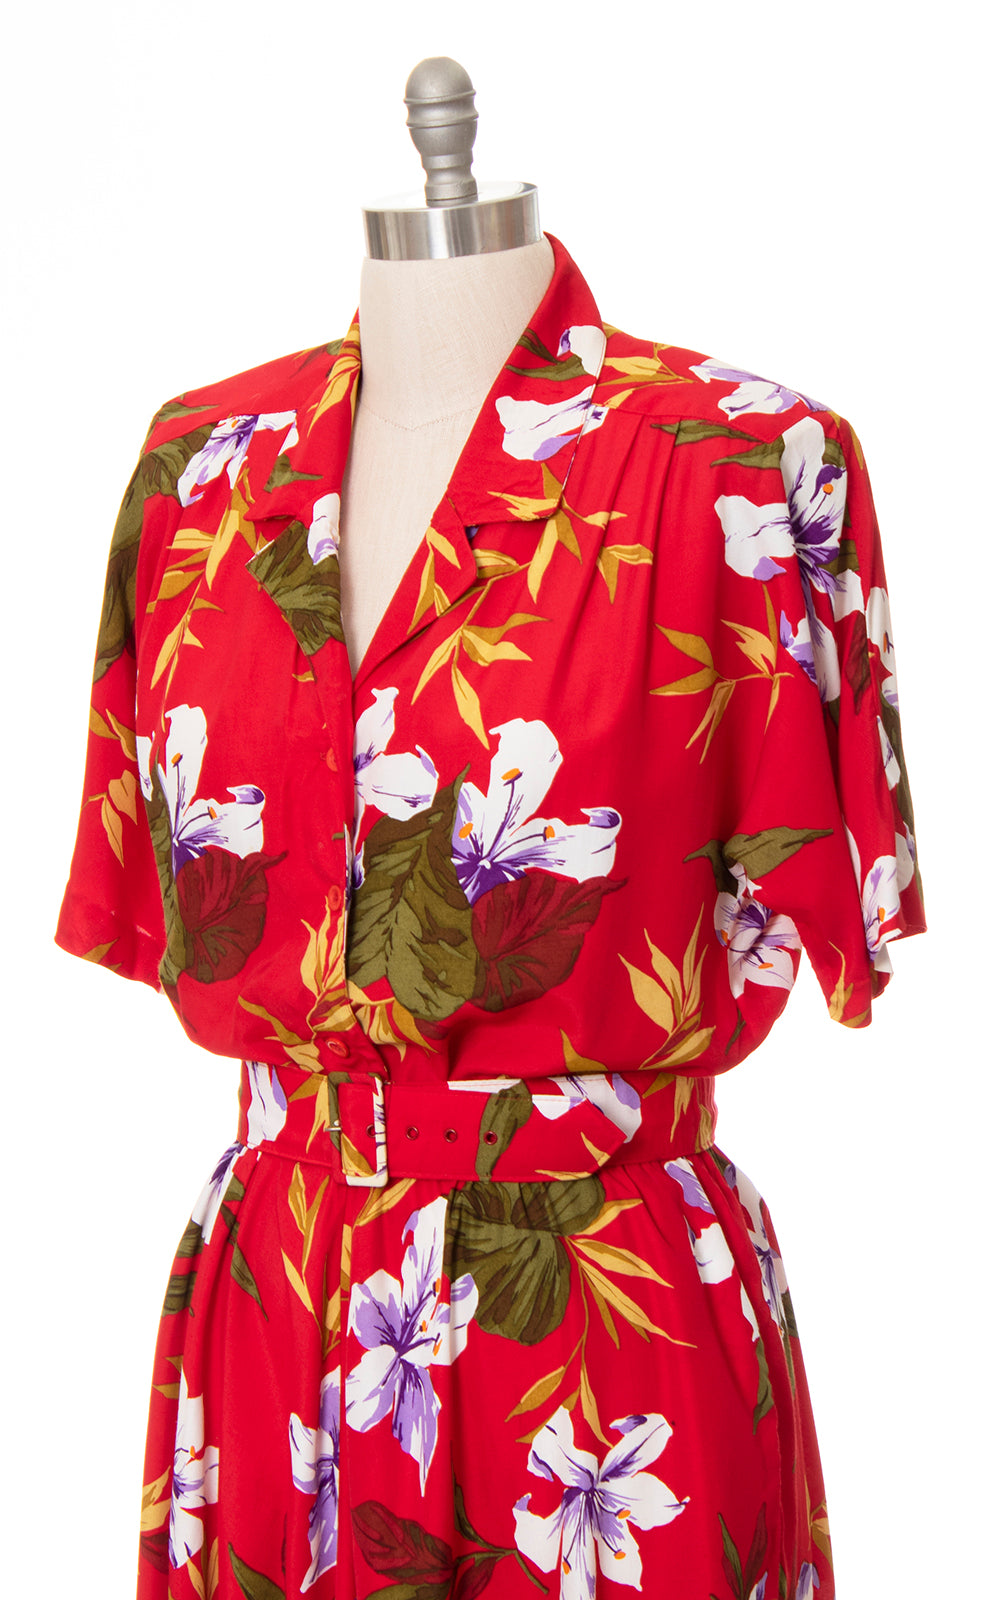 Lily Floral Rayon Shirtwaist Dress with Pockets | large/x-large